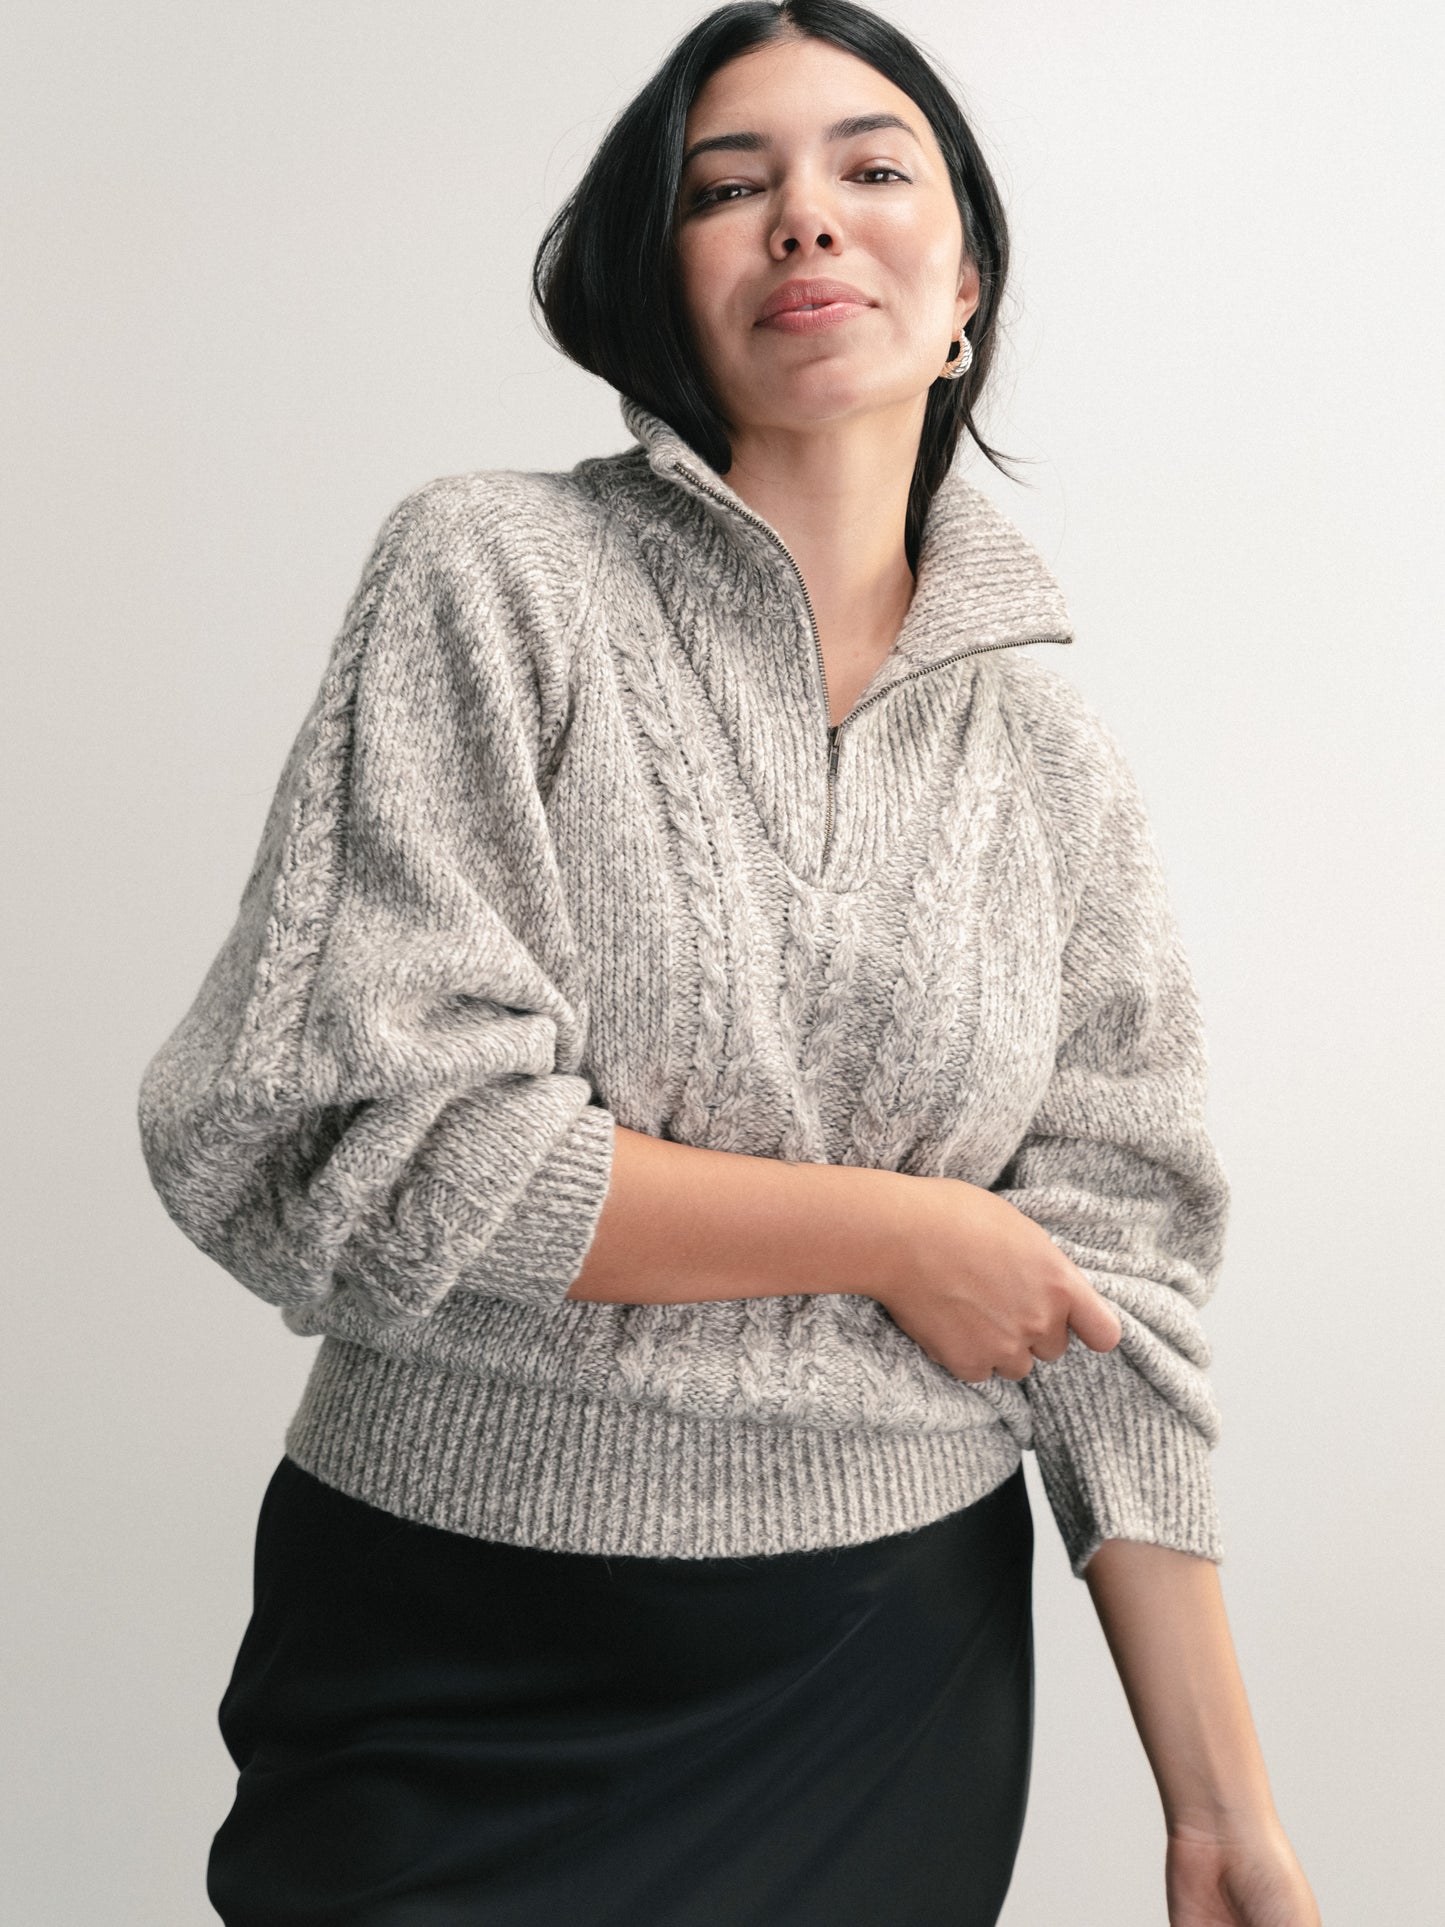 Trusty Cable Knit Sweater